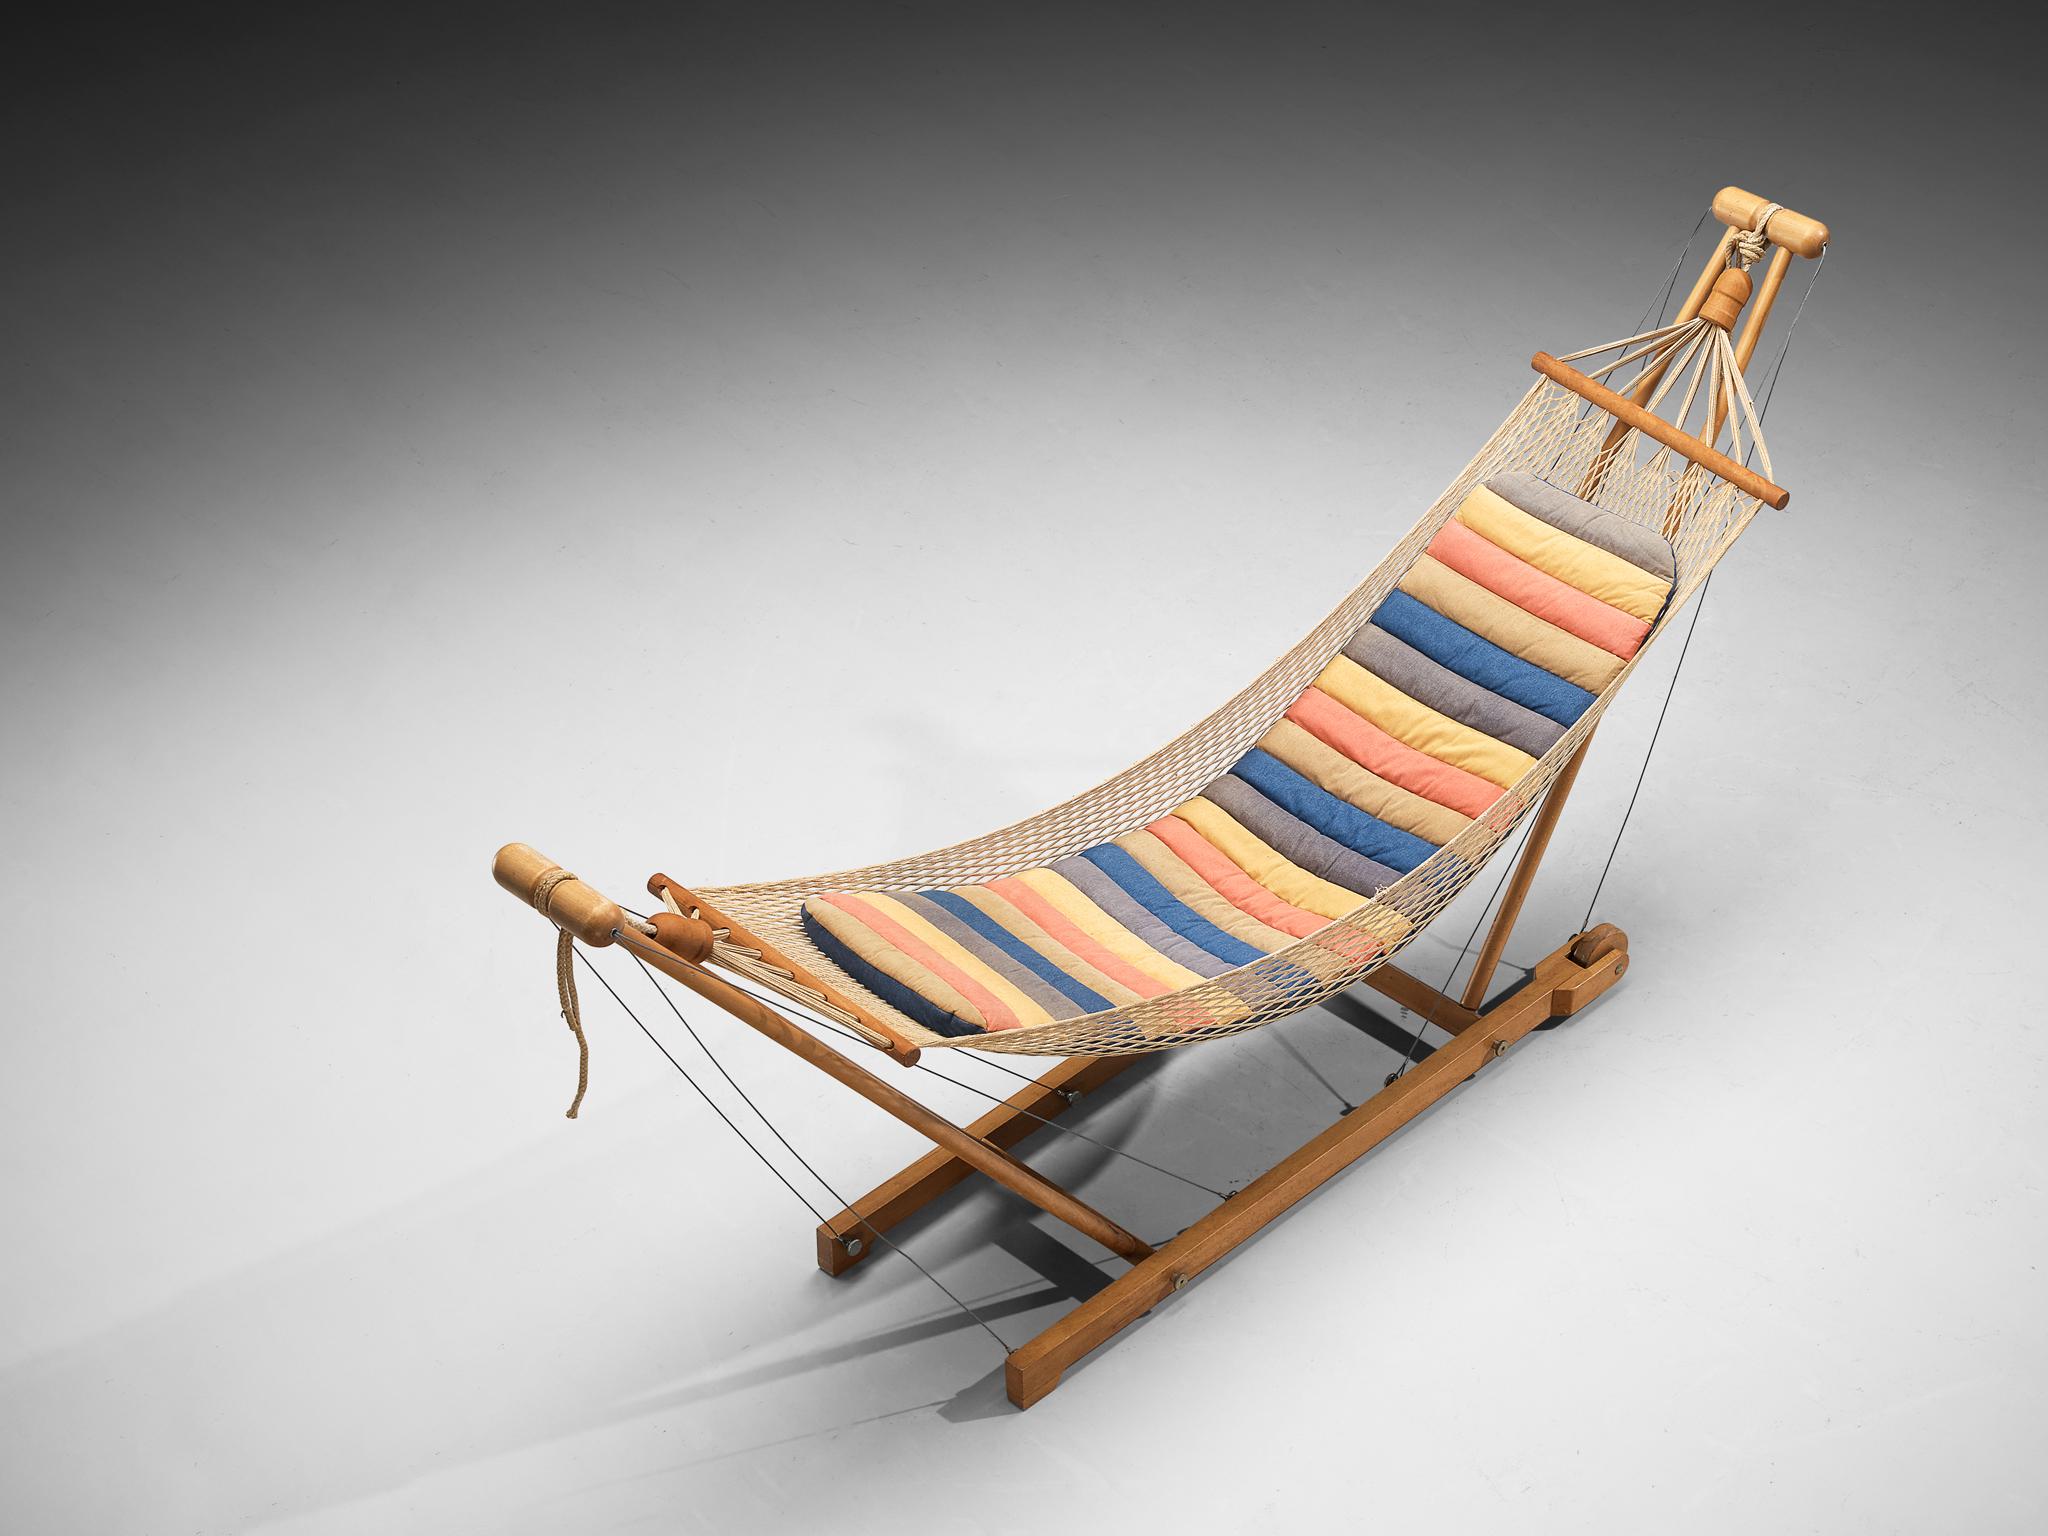 Waldemar Rothe for Rosenthal, 'Relaxer I' hammock, beech, fabric, rope, iron, Germany, 1974

For a calm day off or a break in-between, this wonderful hammock by Waldemar Rothe will ensure a comfortable and satisfying body relaxation. The design is